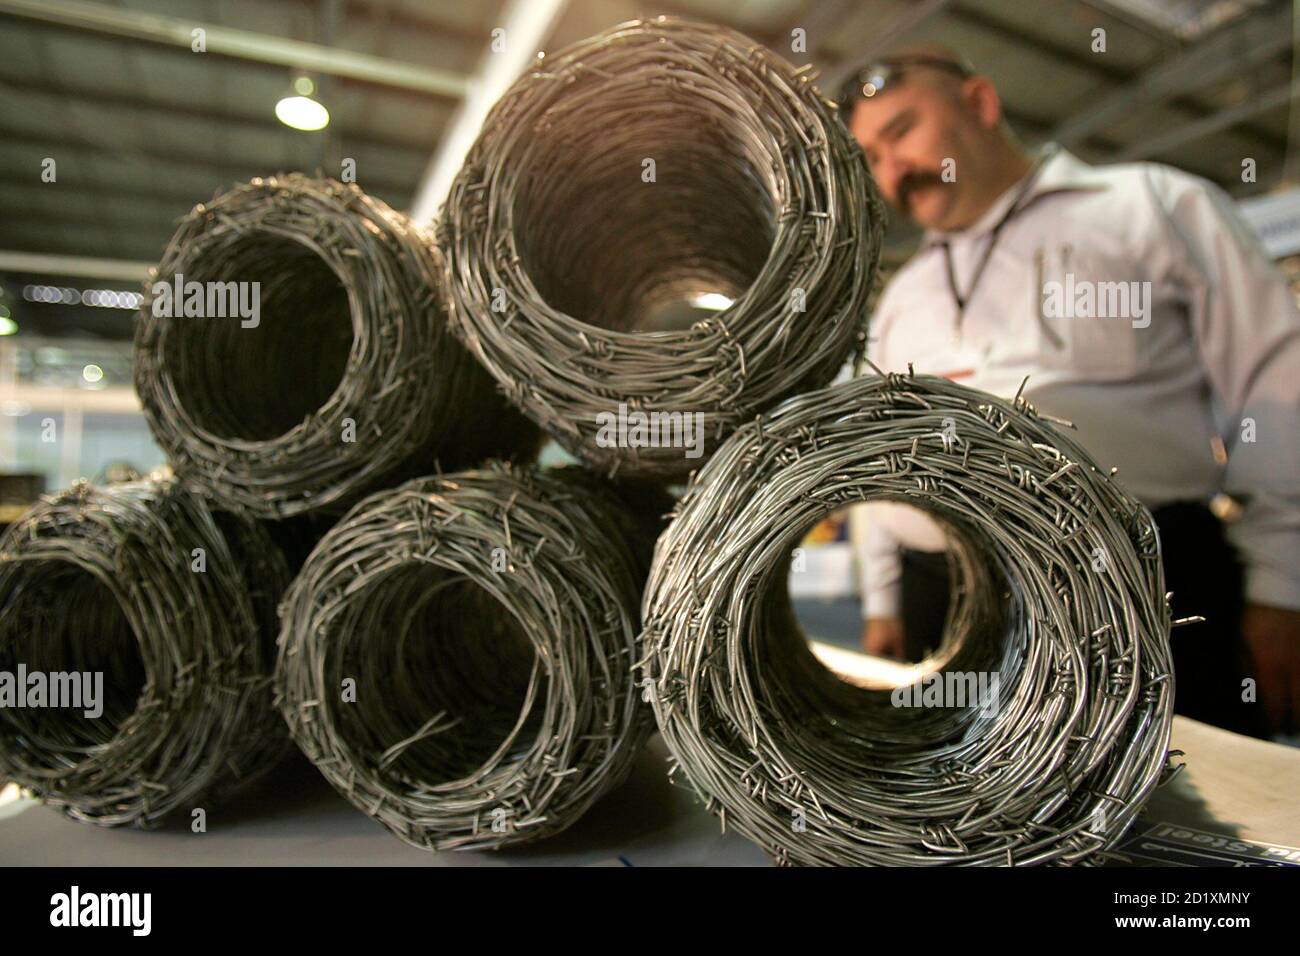 A man looks at rolled up barbed wires during the 5th International Trade  Fair for the Rebuilding of Iraq in Amman April 14, 2008. REUTERS/Muhammad  Hamed (JORDAN Stock Photo - Alamy